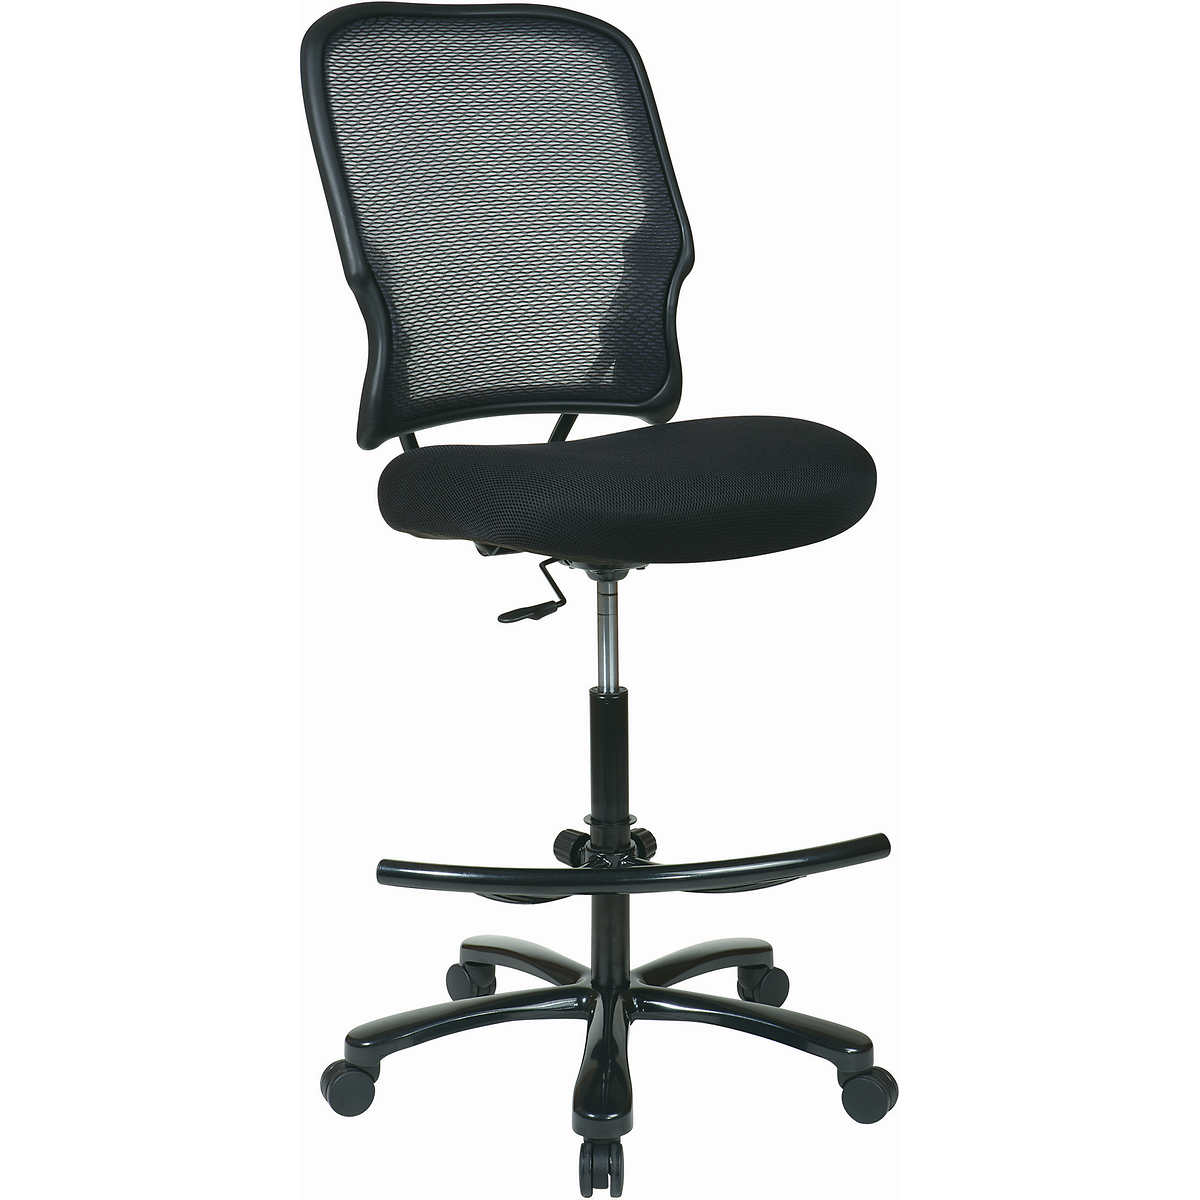 100 Bayside Metro Mesh Office Chair Staples Office Chairsoffice